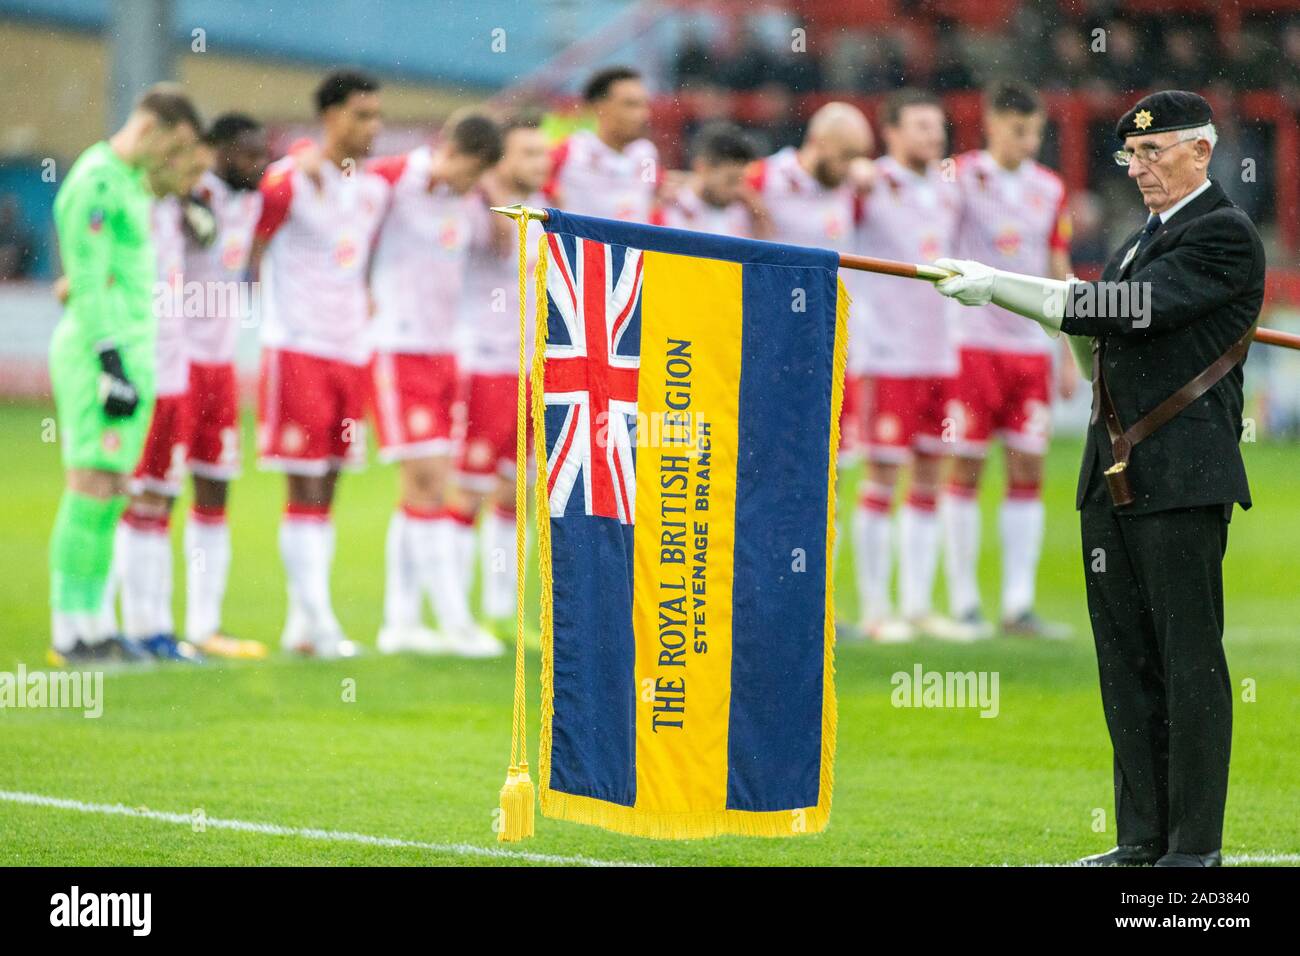 Football players observe minute silence whilst British Legion member lowers banner during Remembrance Sunday commemorations Stock Photo